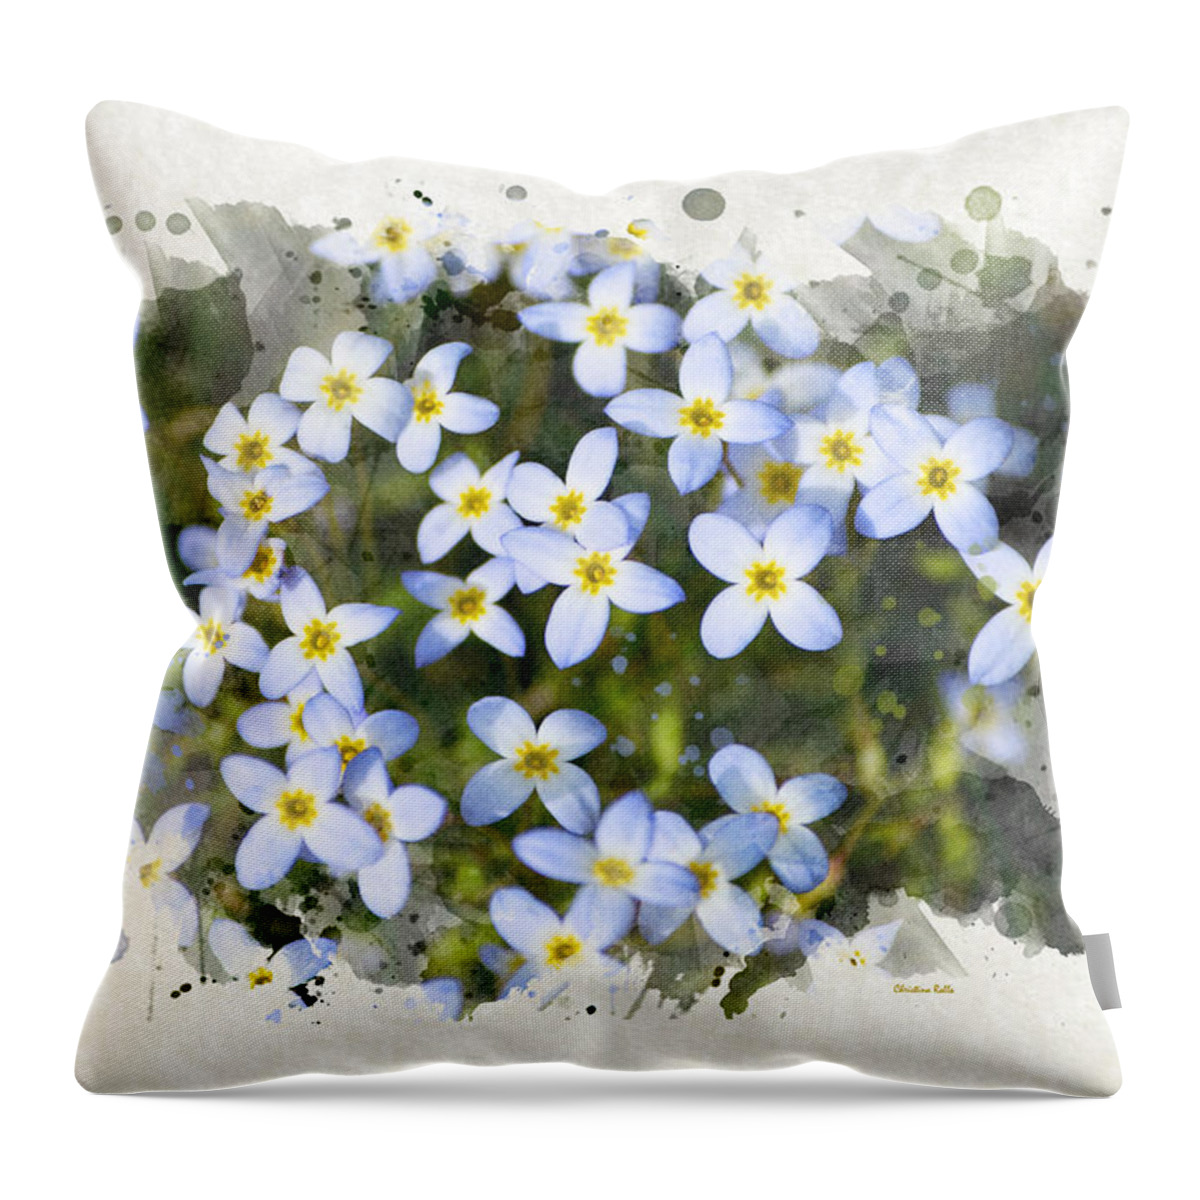 Blue Flowers Throw Pillow featuring the mixed media Bluet Flowers Watercolor Art by Christina Rollo